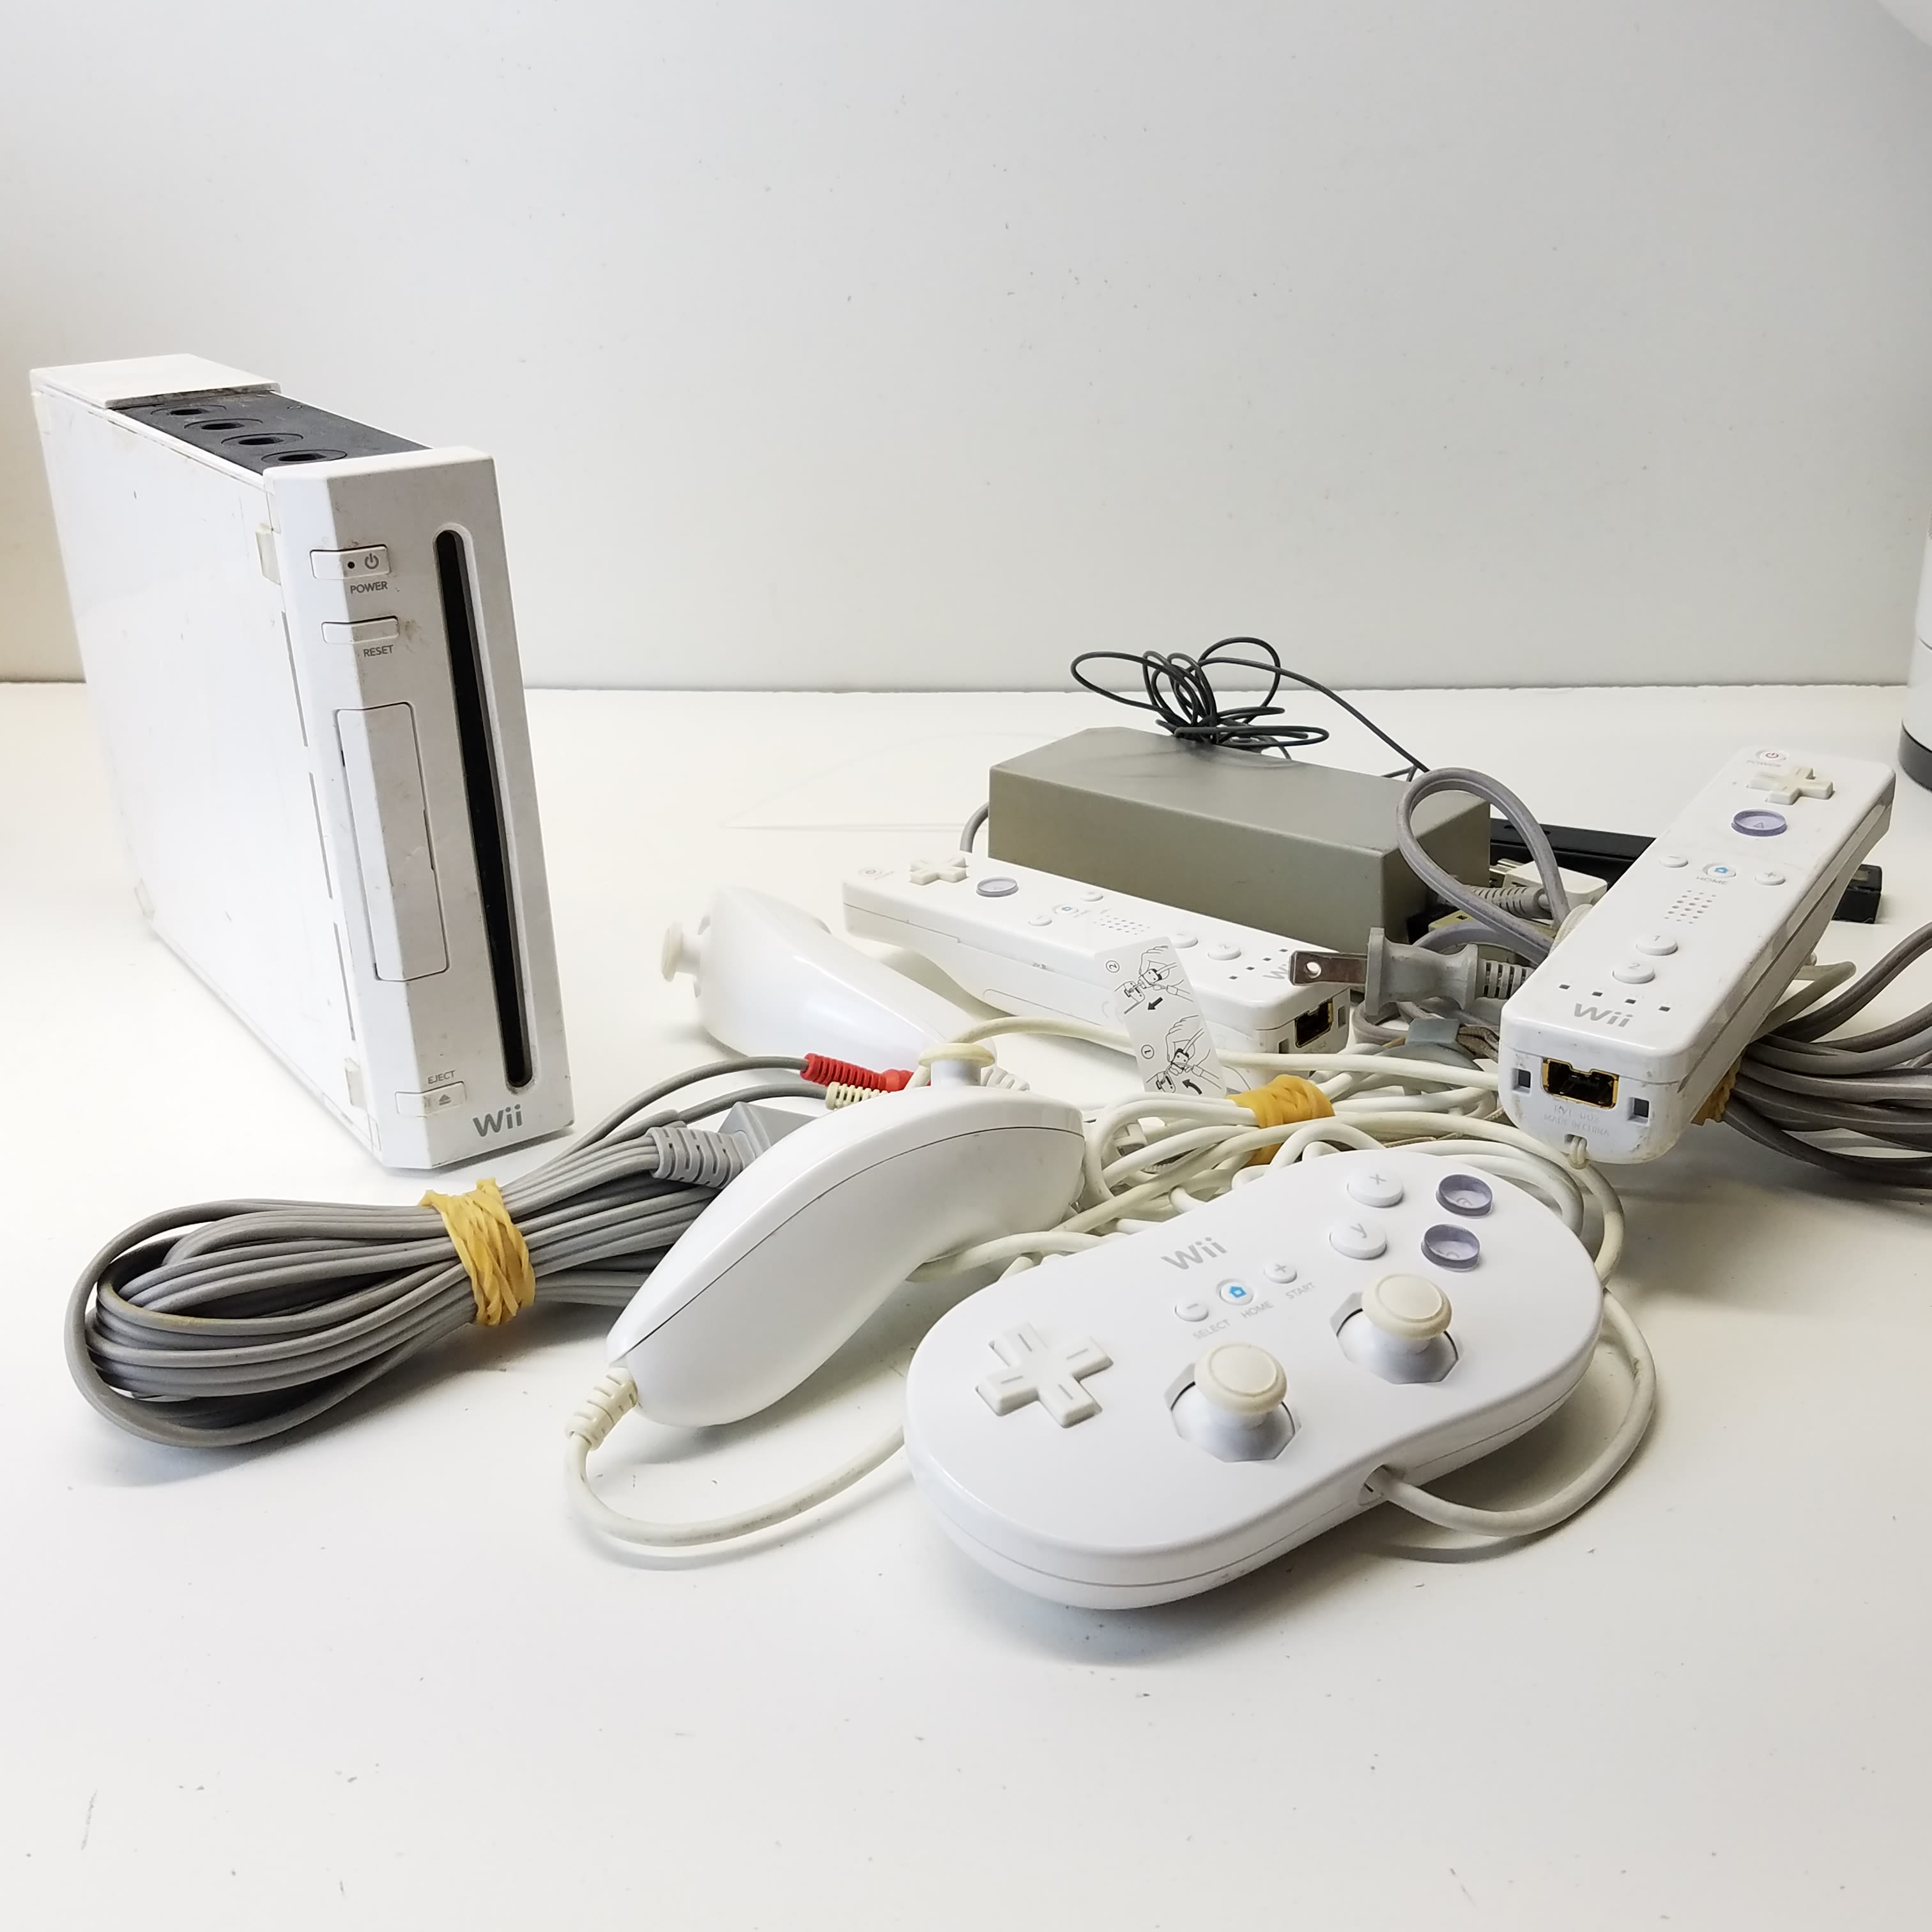 Buy Nintendo Wii Console W/ Accessories for USD 58.49 | GoodwillFinds